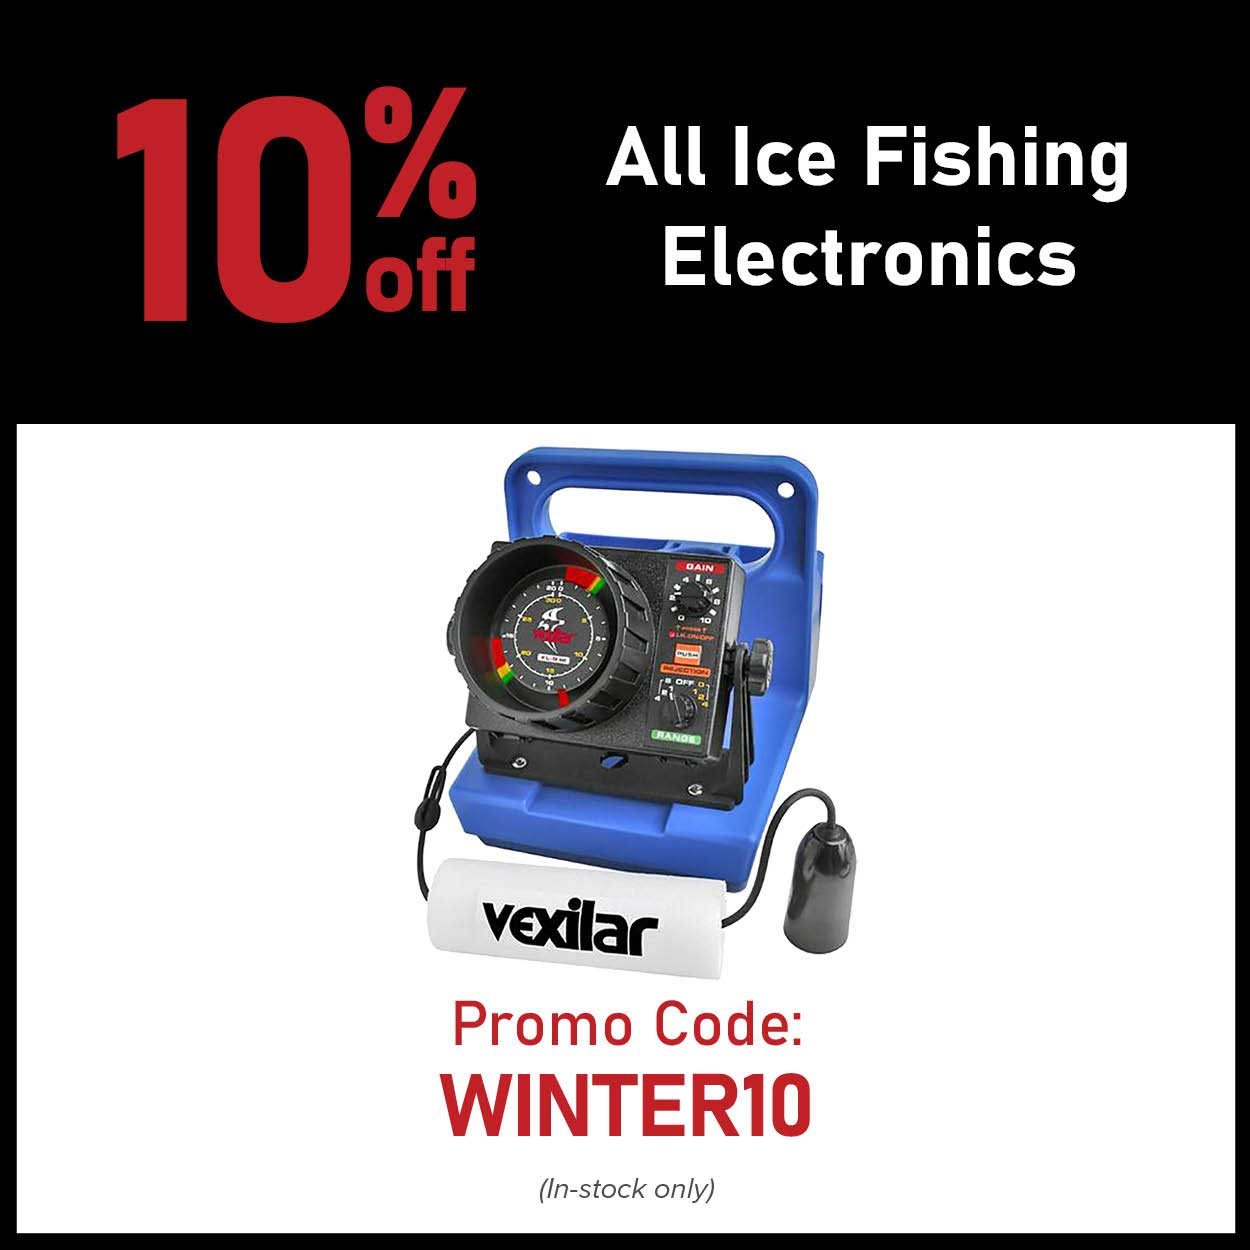 10% Off All Ice Fishing Electronics Promo Code: WINTER10 (In-stock only)